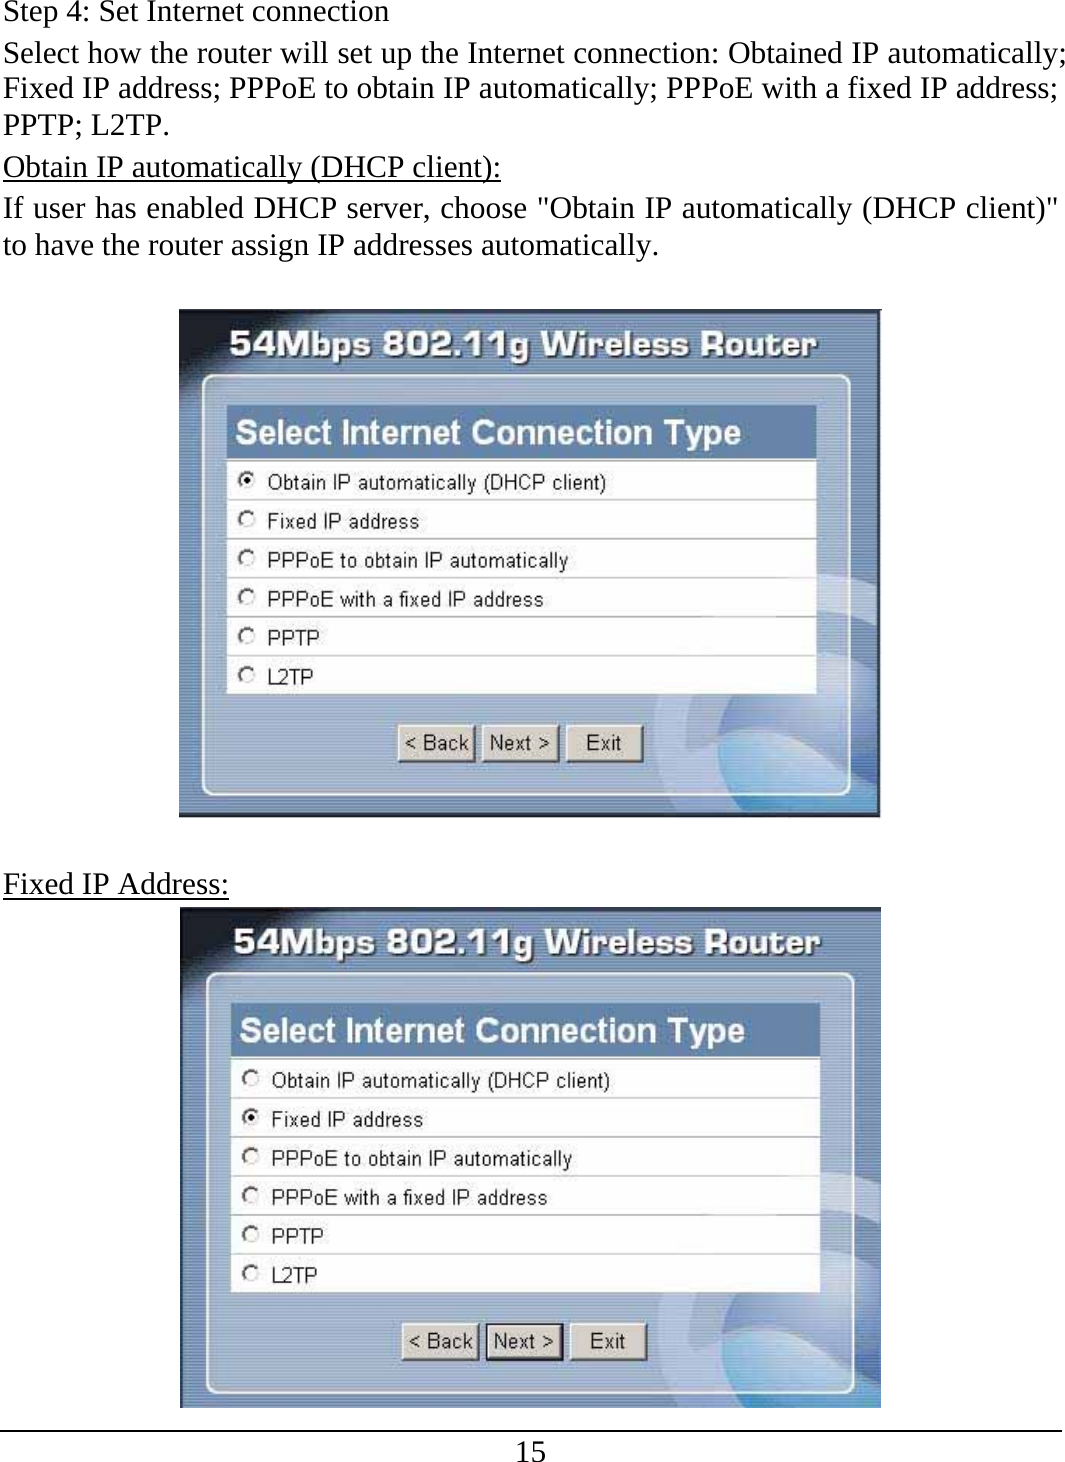 15 Step 4: Set Internet connection Select how the router will set up the Internet connection: Obtained IP automatically; Fixed IP address; PPPoE to obtain IP automatically; PPPoE with a fixed IP address; PPTP; L2TP. Obtain IP automatically (DHCP client): If user has enabled DHCP server, choose &quot;Obtain IP automatically (DHCP client)&quot; to have the router assign IP addresses automatically.    Fixed IP Address:  